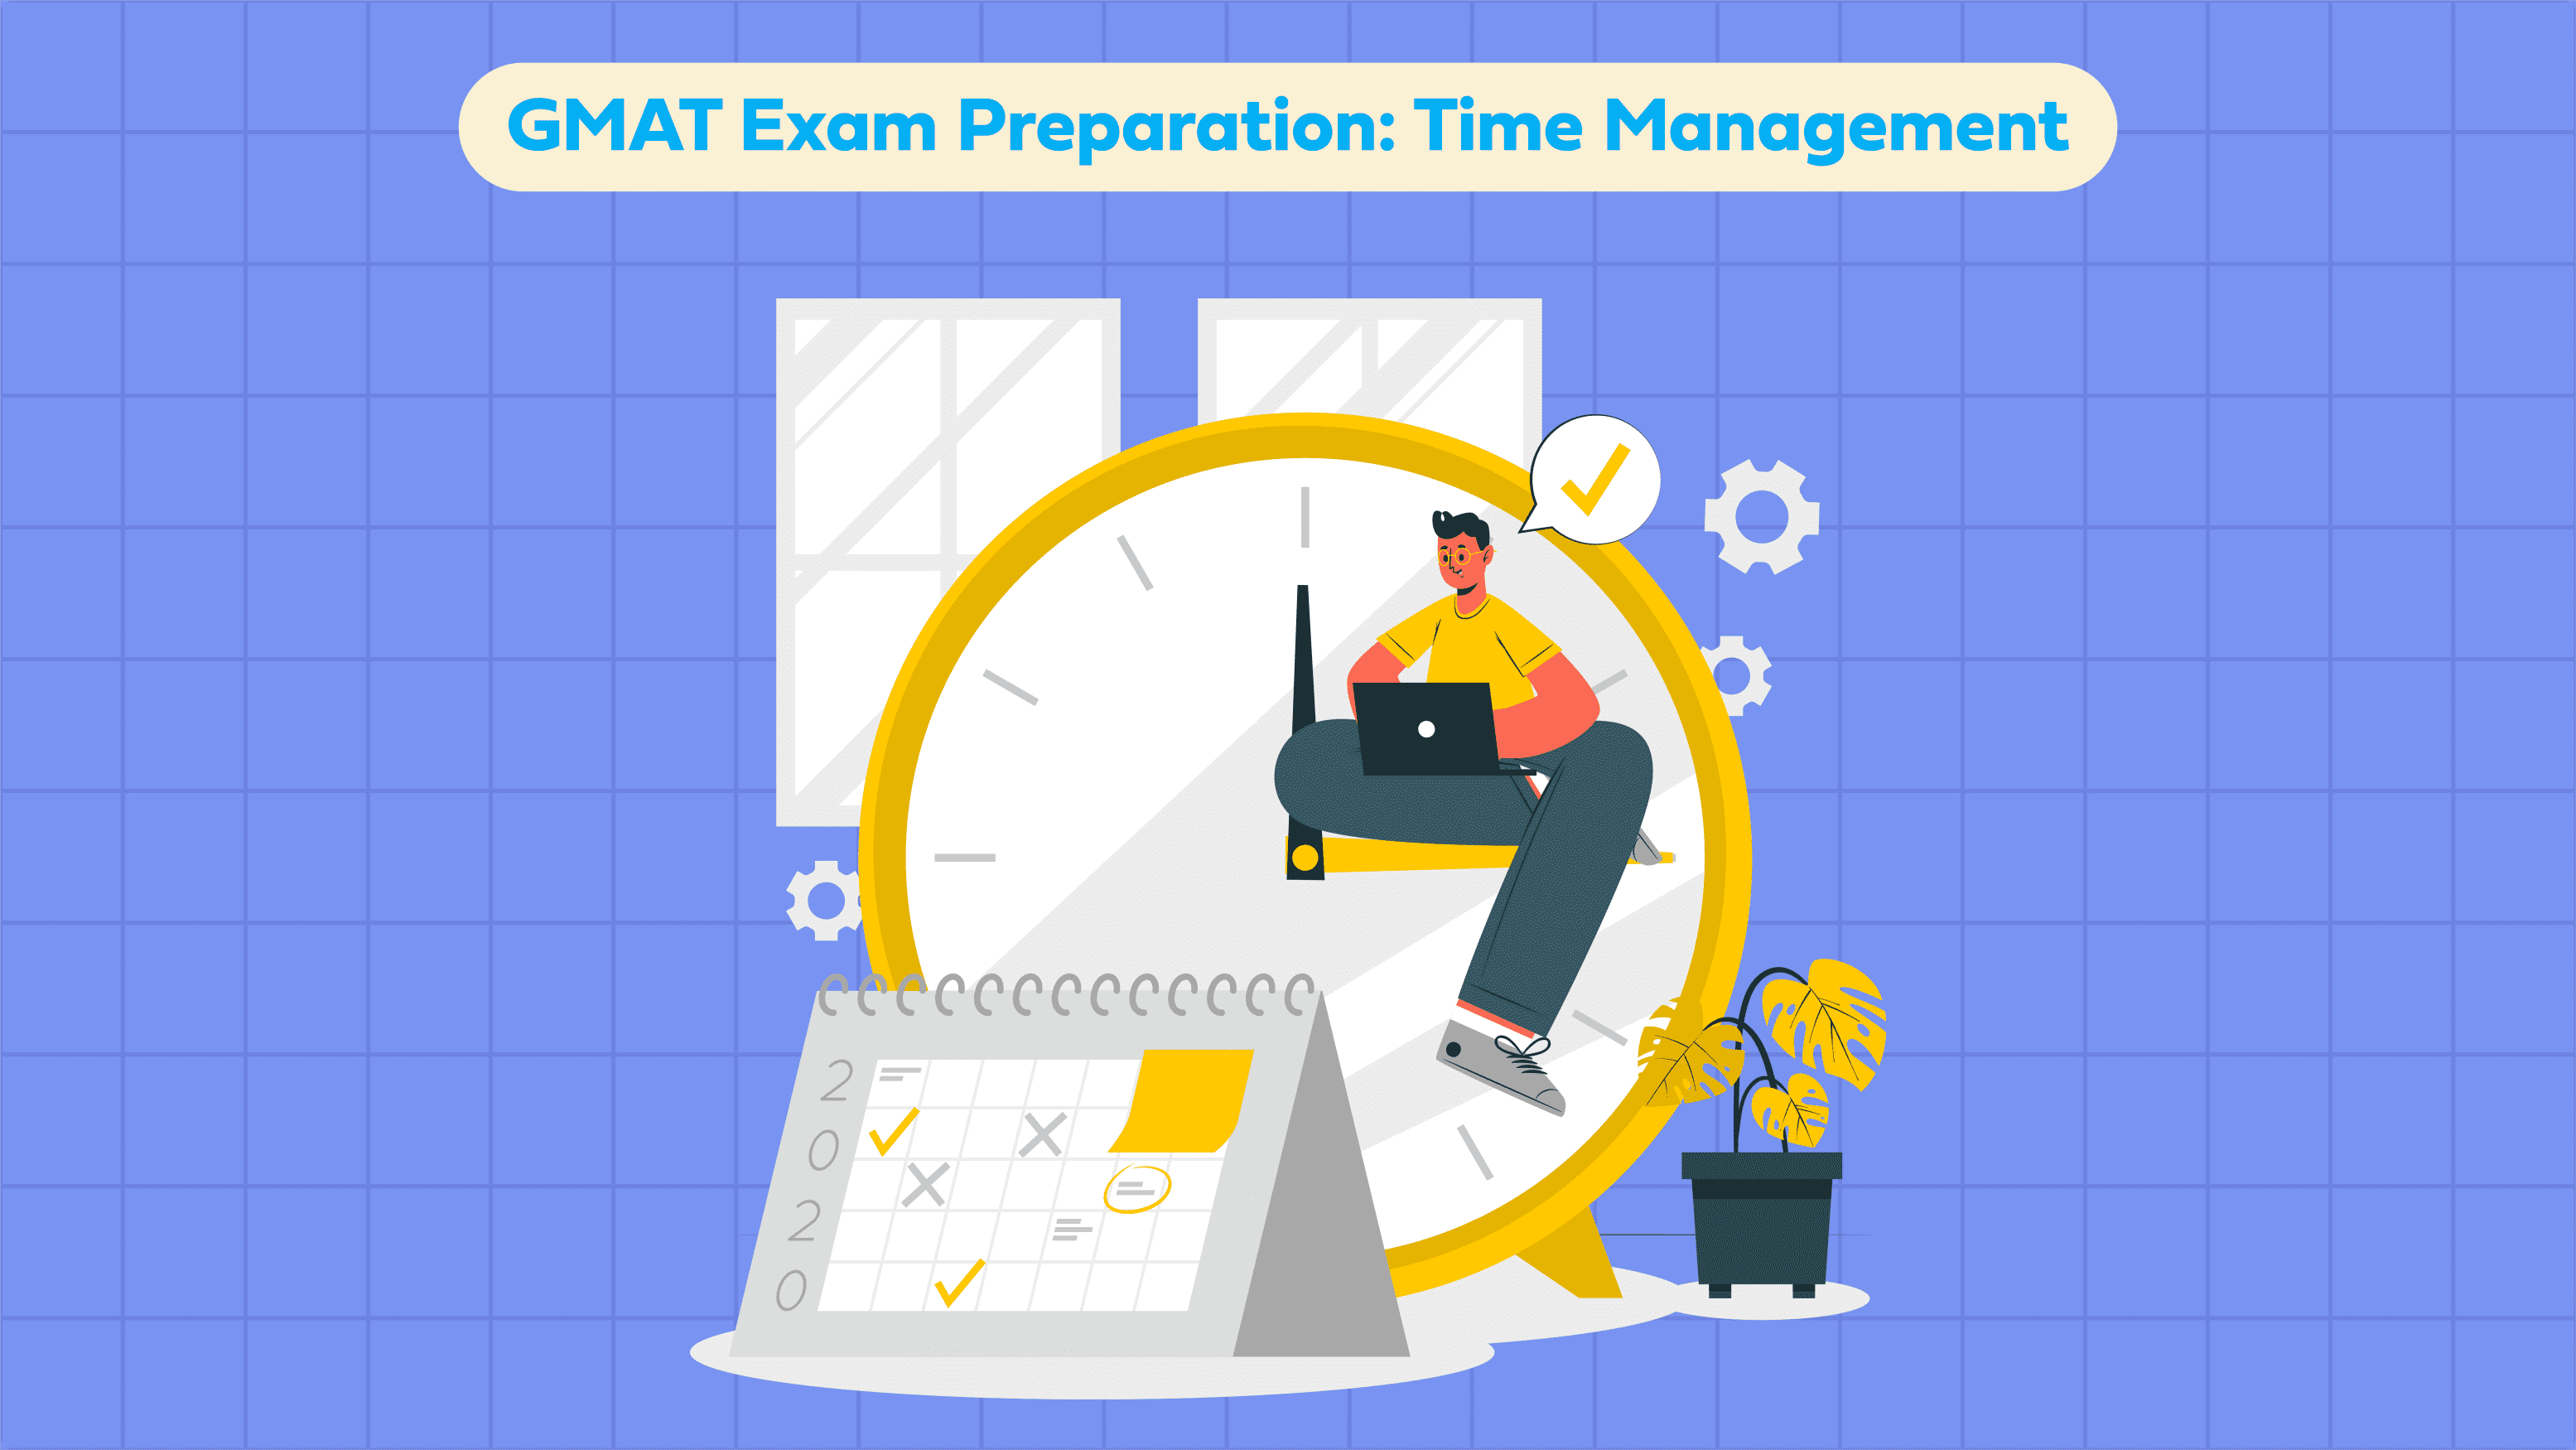 Time Management Tips for GMAT Exam